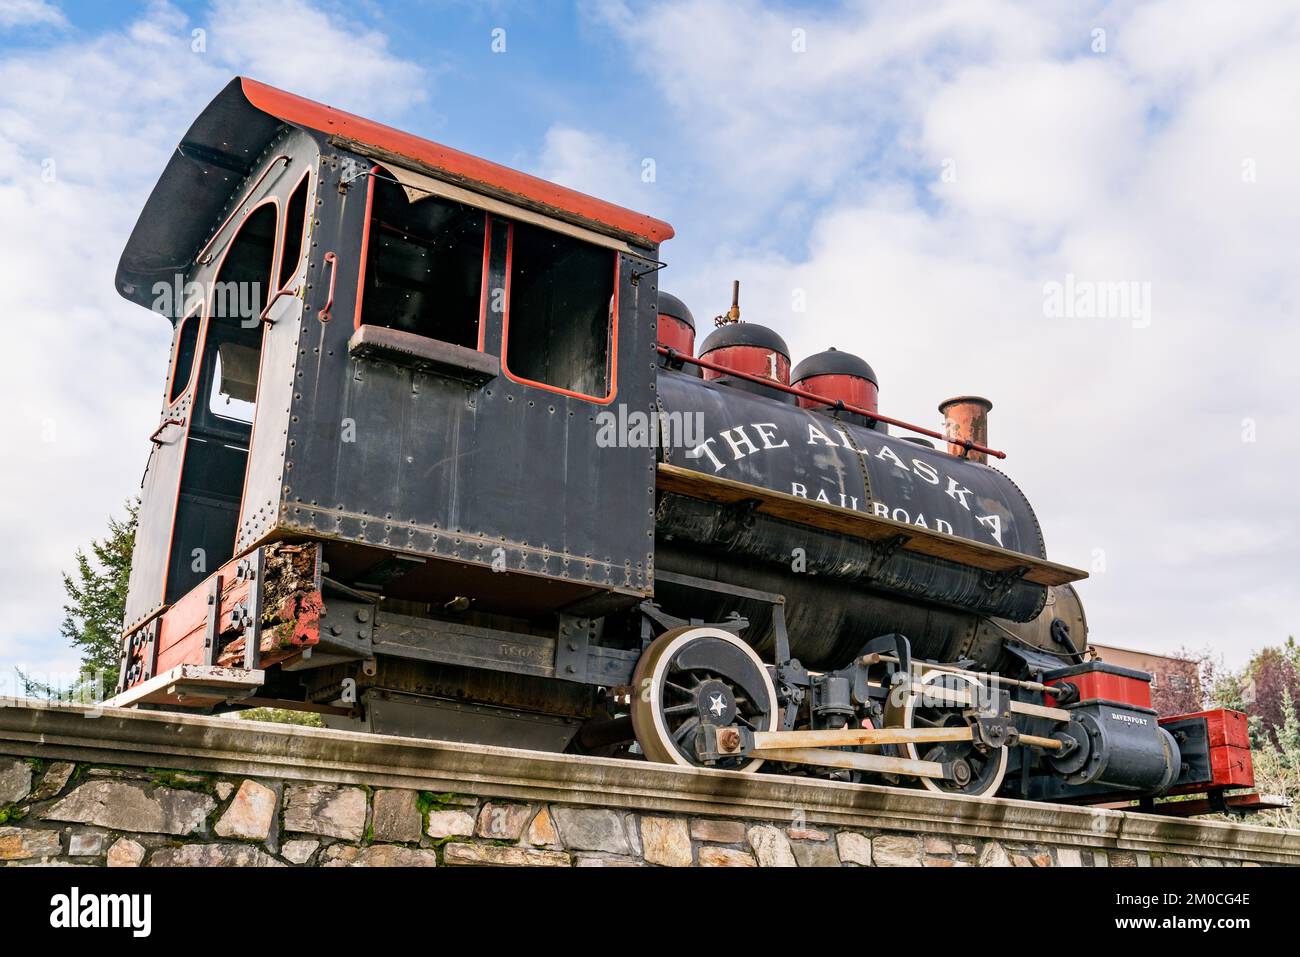 Anchorage, AK - September 4, 2022: Old antique Alaska Railroad Locomotive Number One outside of the Anchorage Railroad Depot Stock Photo